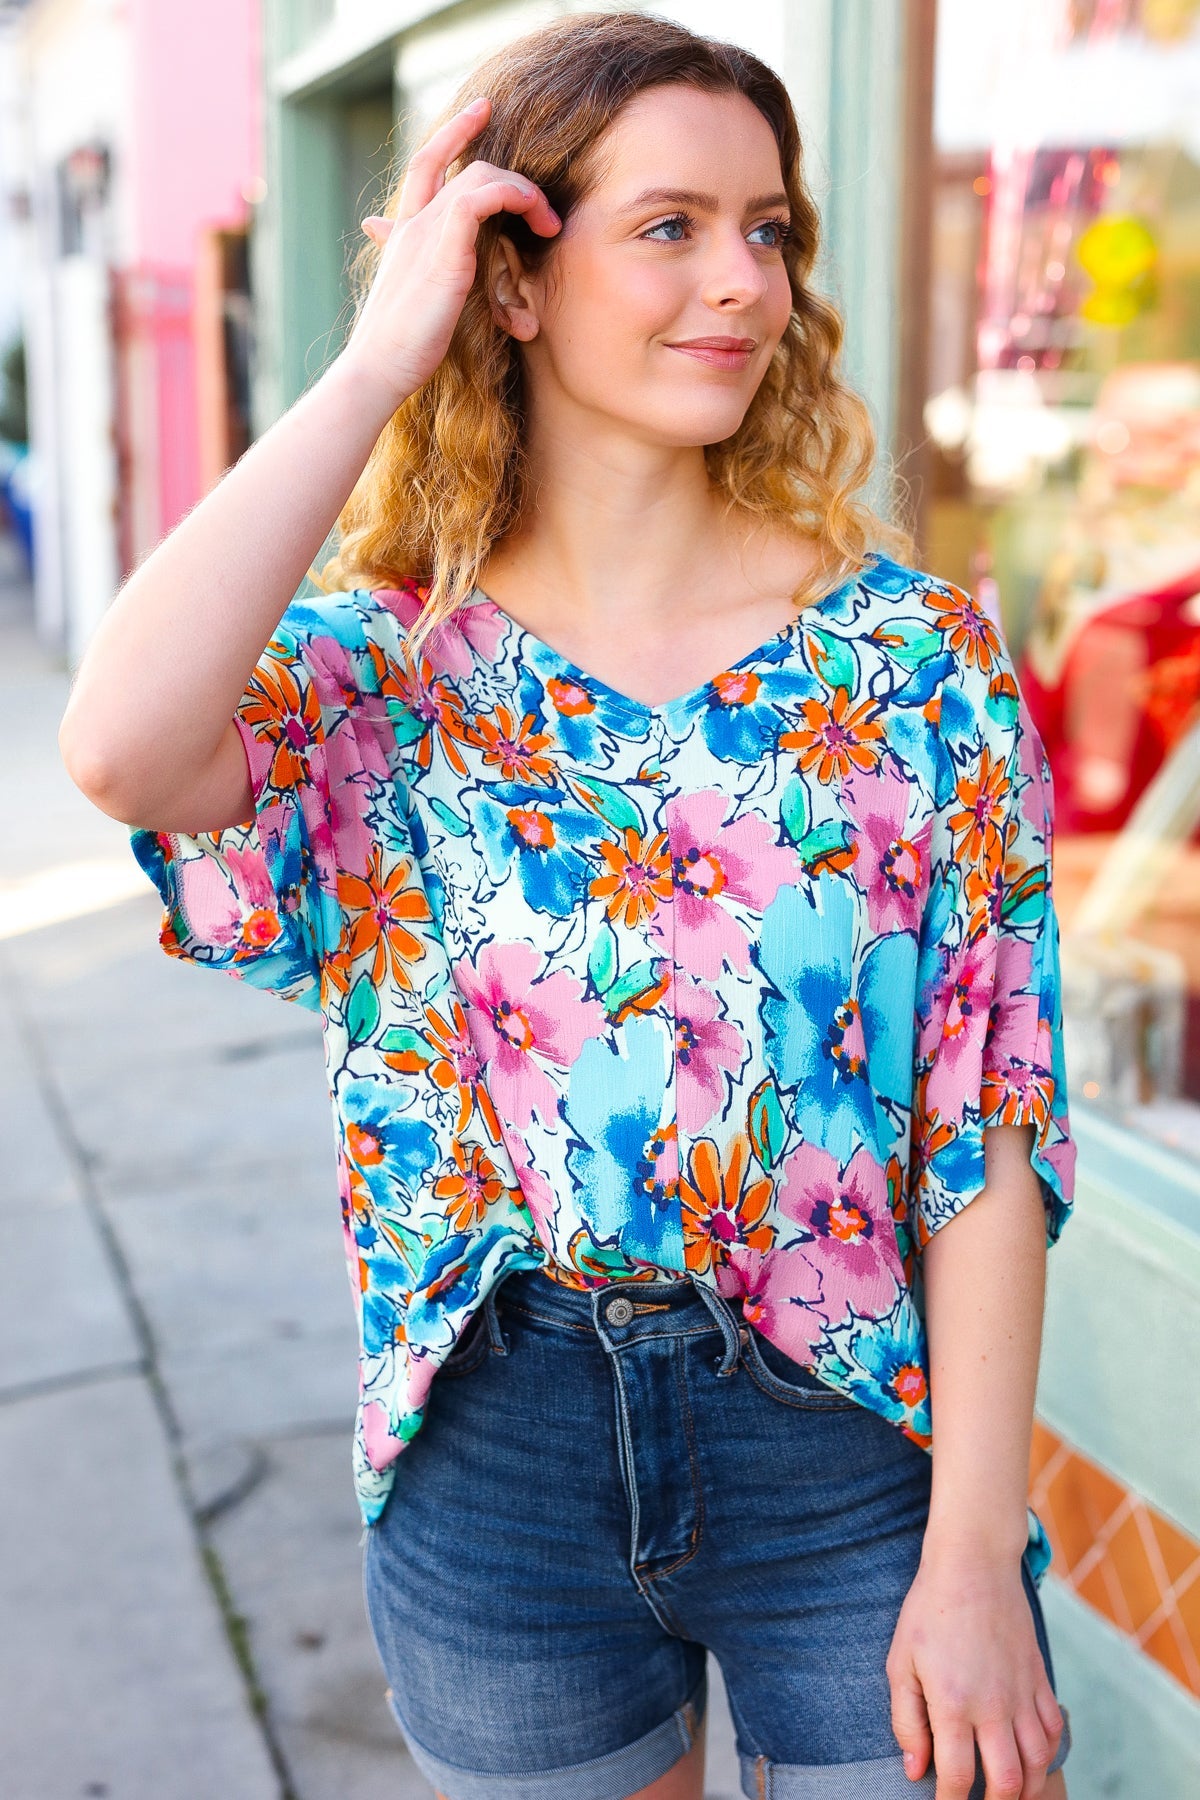 Pink & Blue Floral Print Woven Top